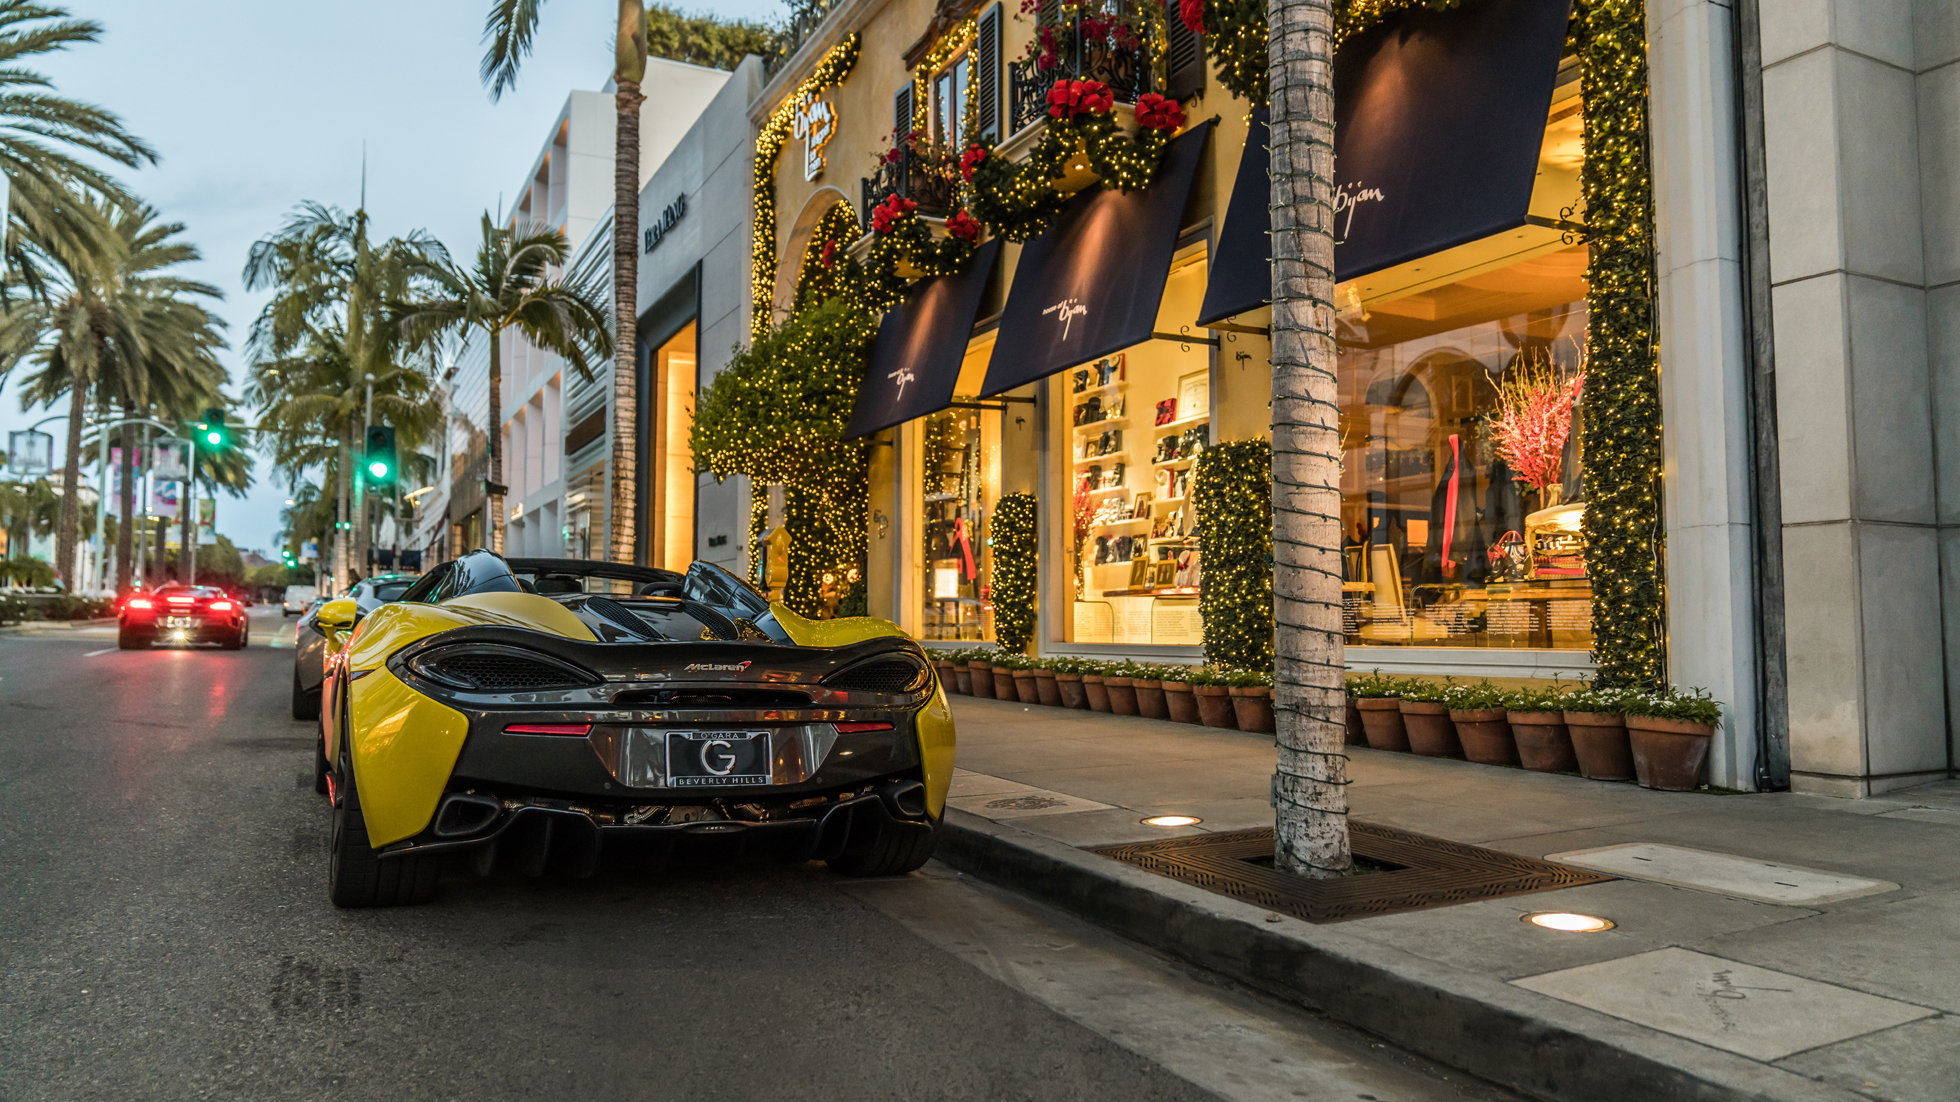 What is better than taking over all of Rodeo Drive